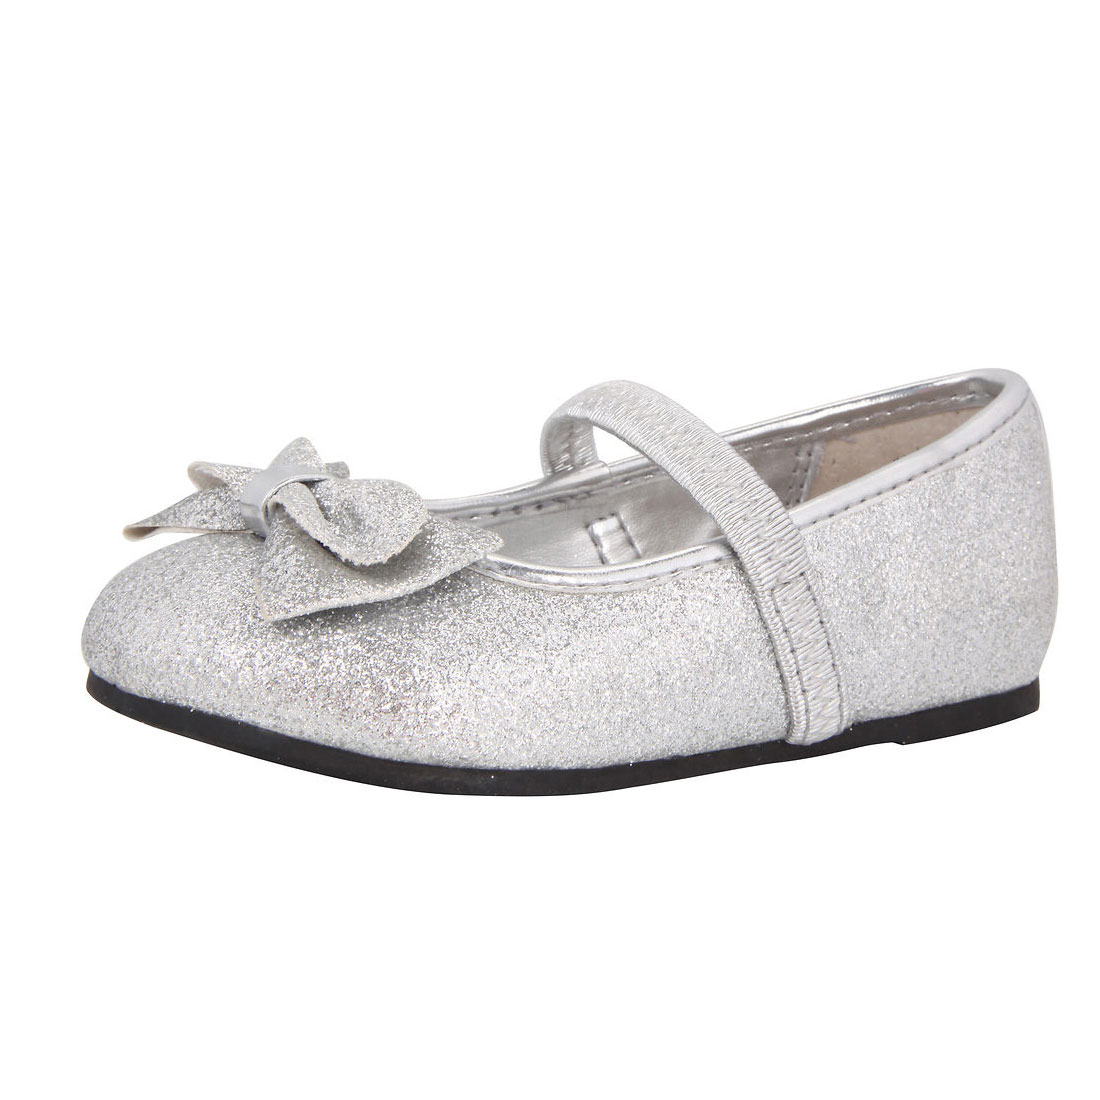 silver glitter upper with bow girl dress shoes flat shoes YH0005 - Girl ...